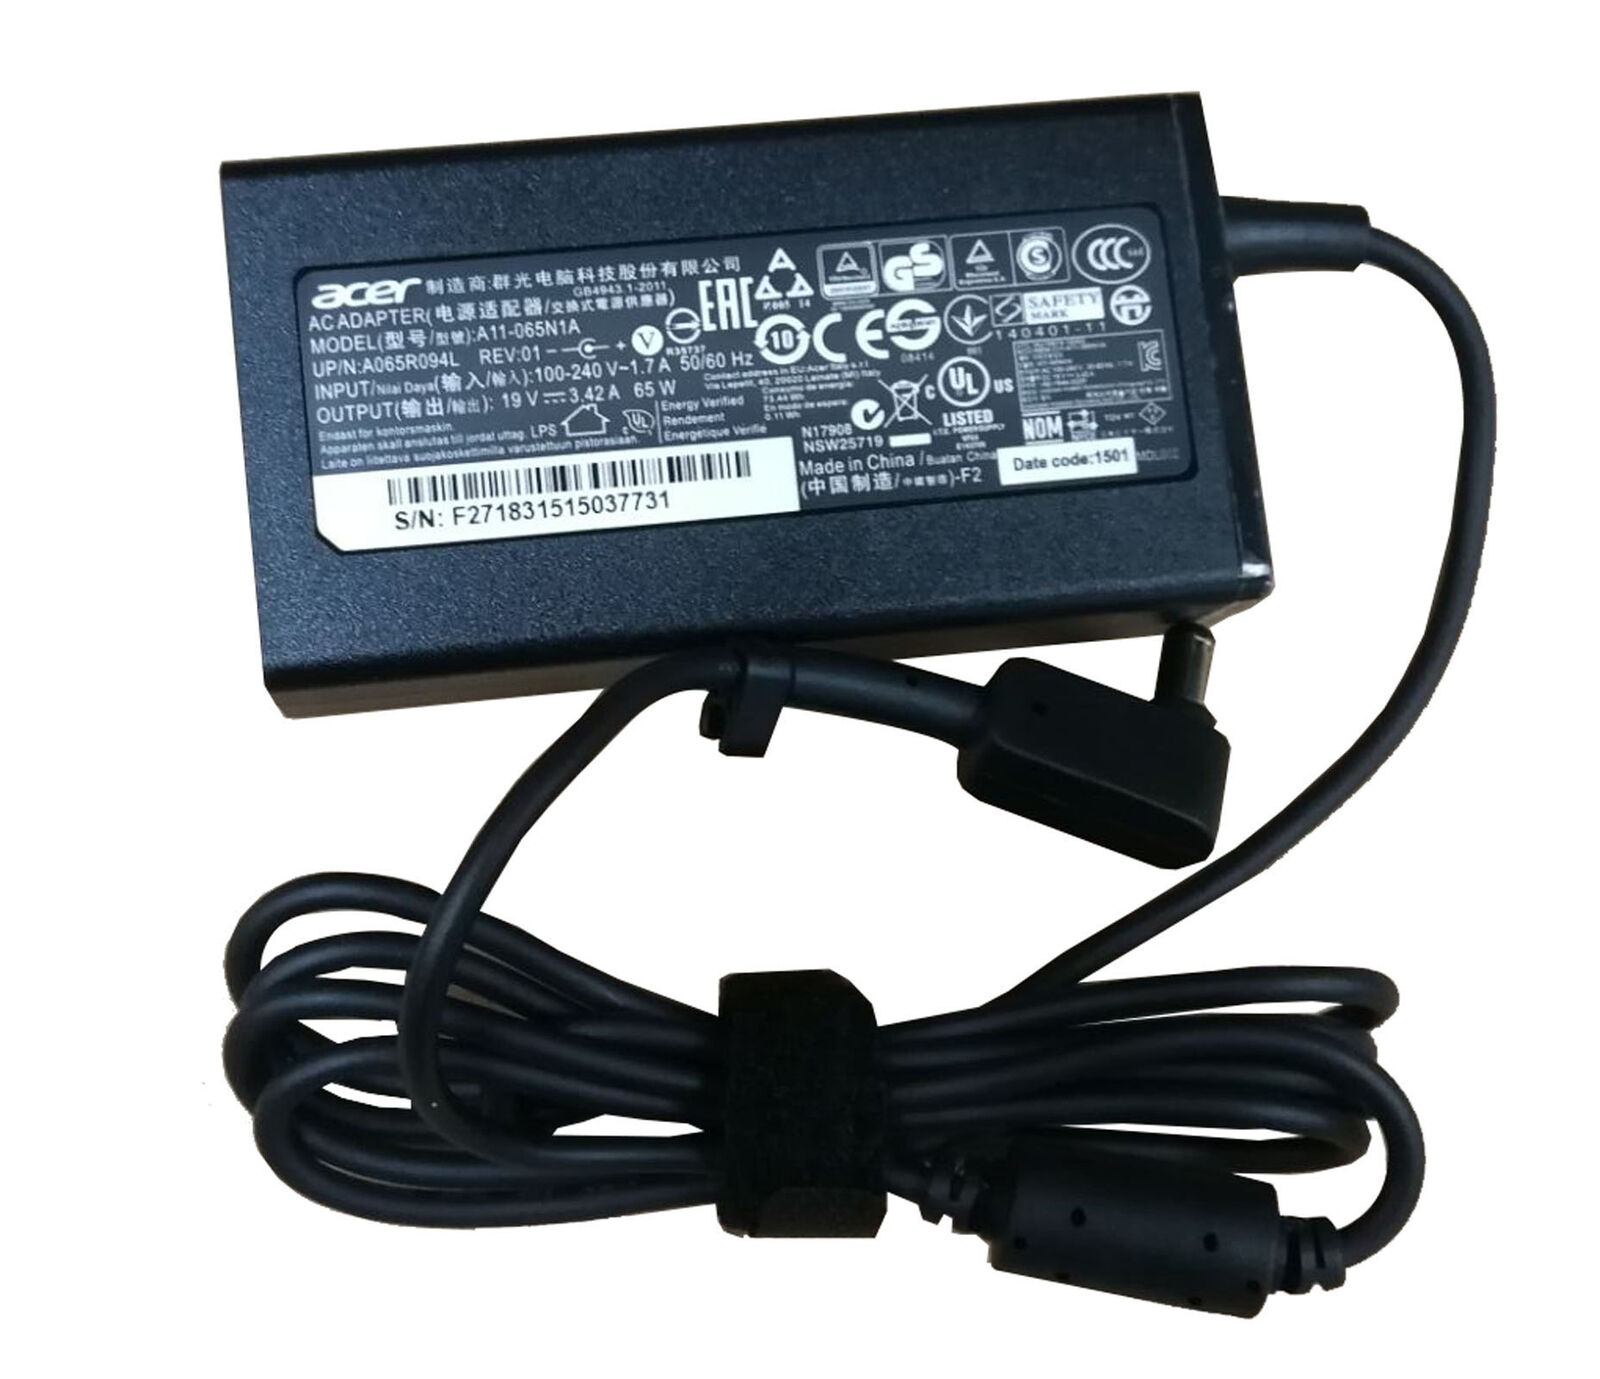 65W Acer Iconia Tab W700-6495 Charger AC Adapter Power Cord